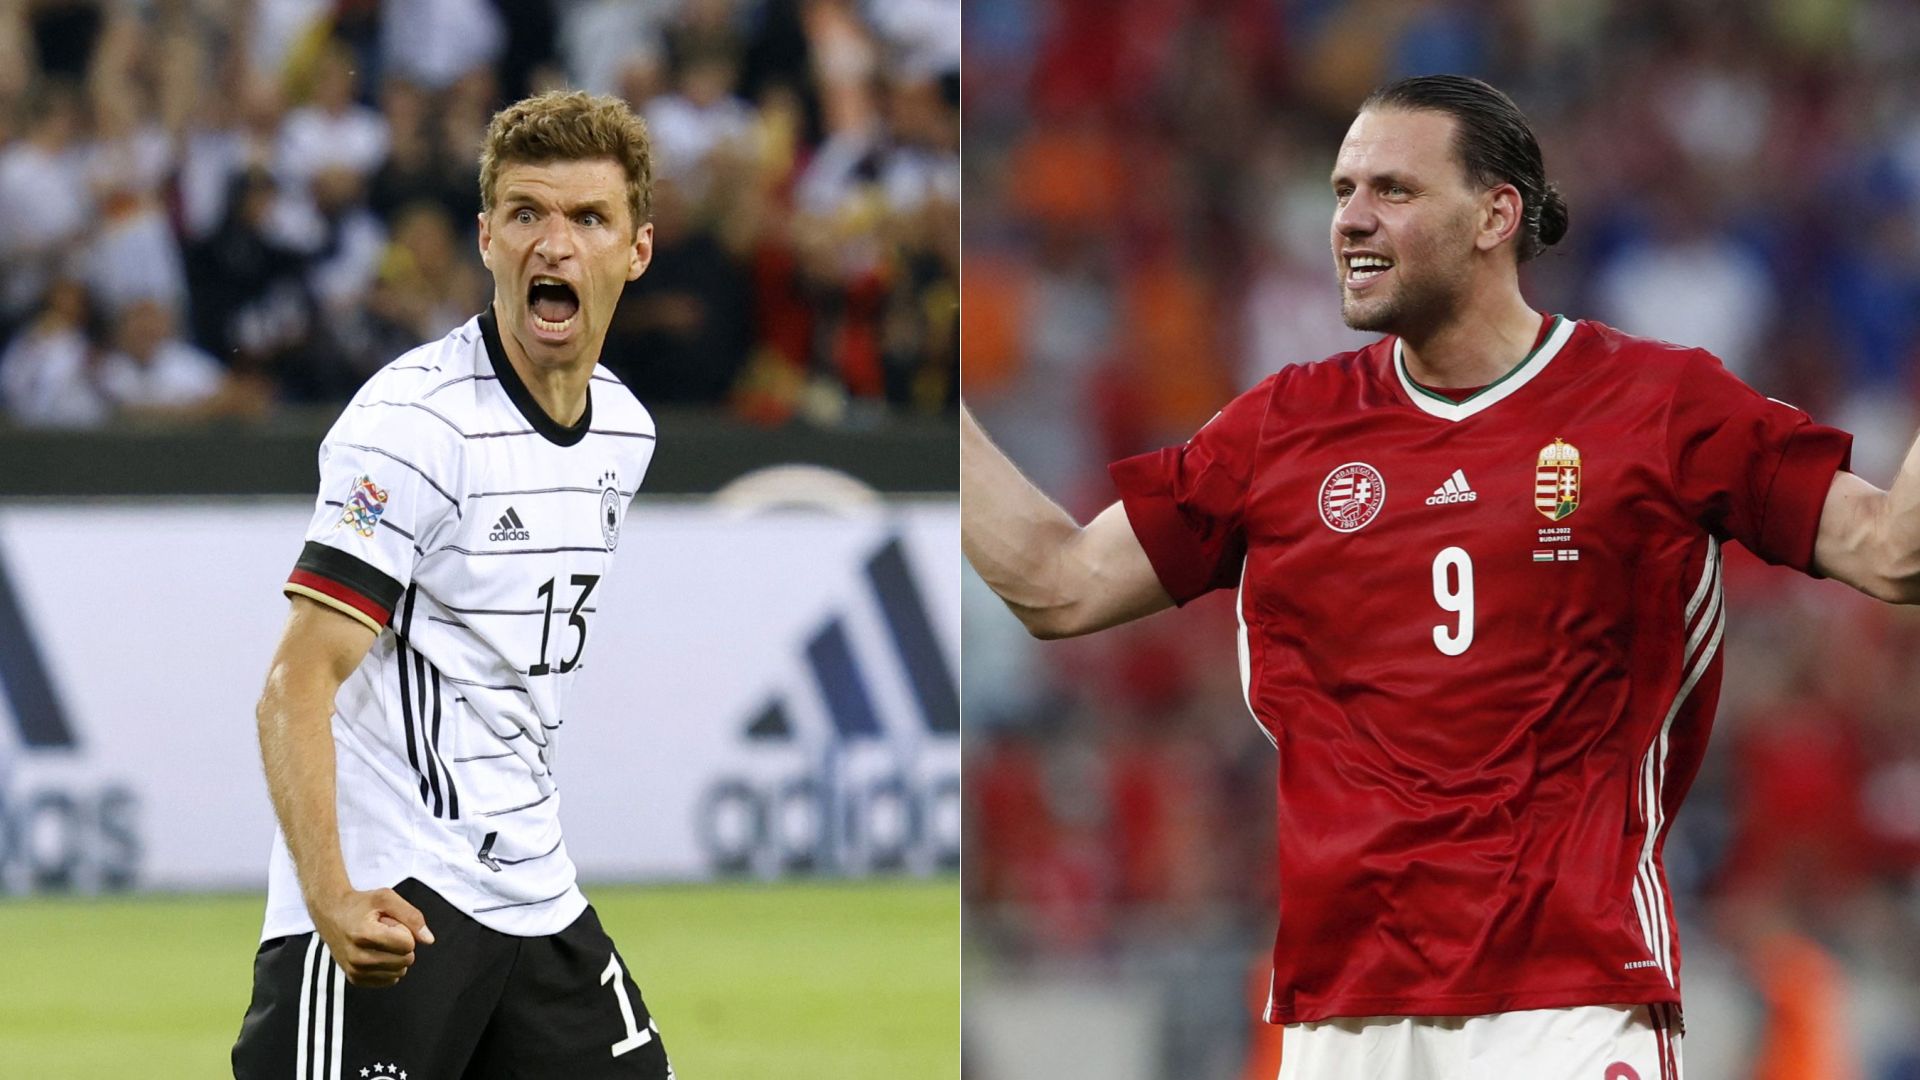 Germany vs Hungary: They will be measured against Group A3 of the 2022 Nations League